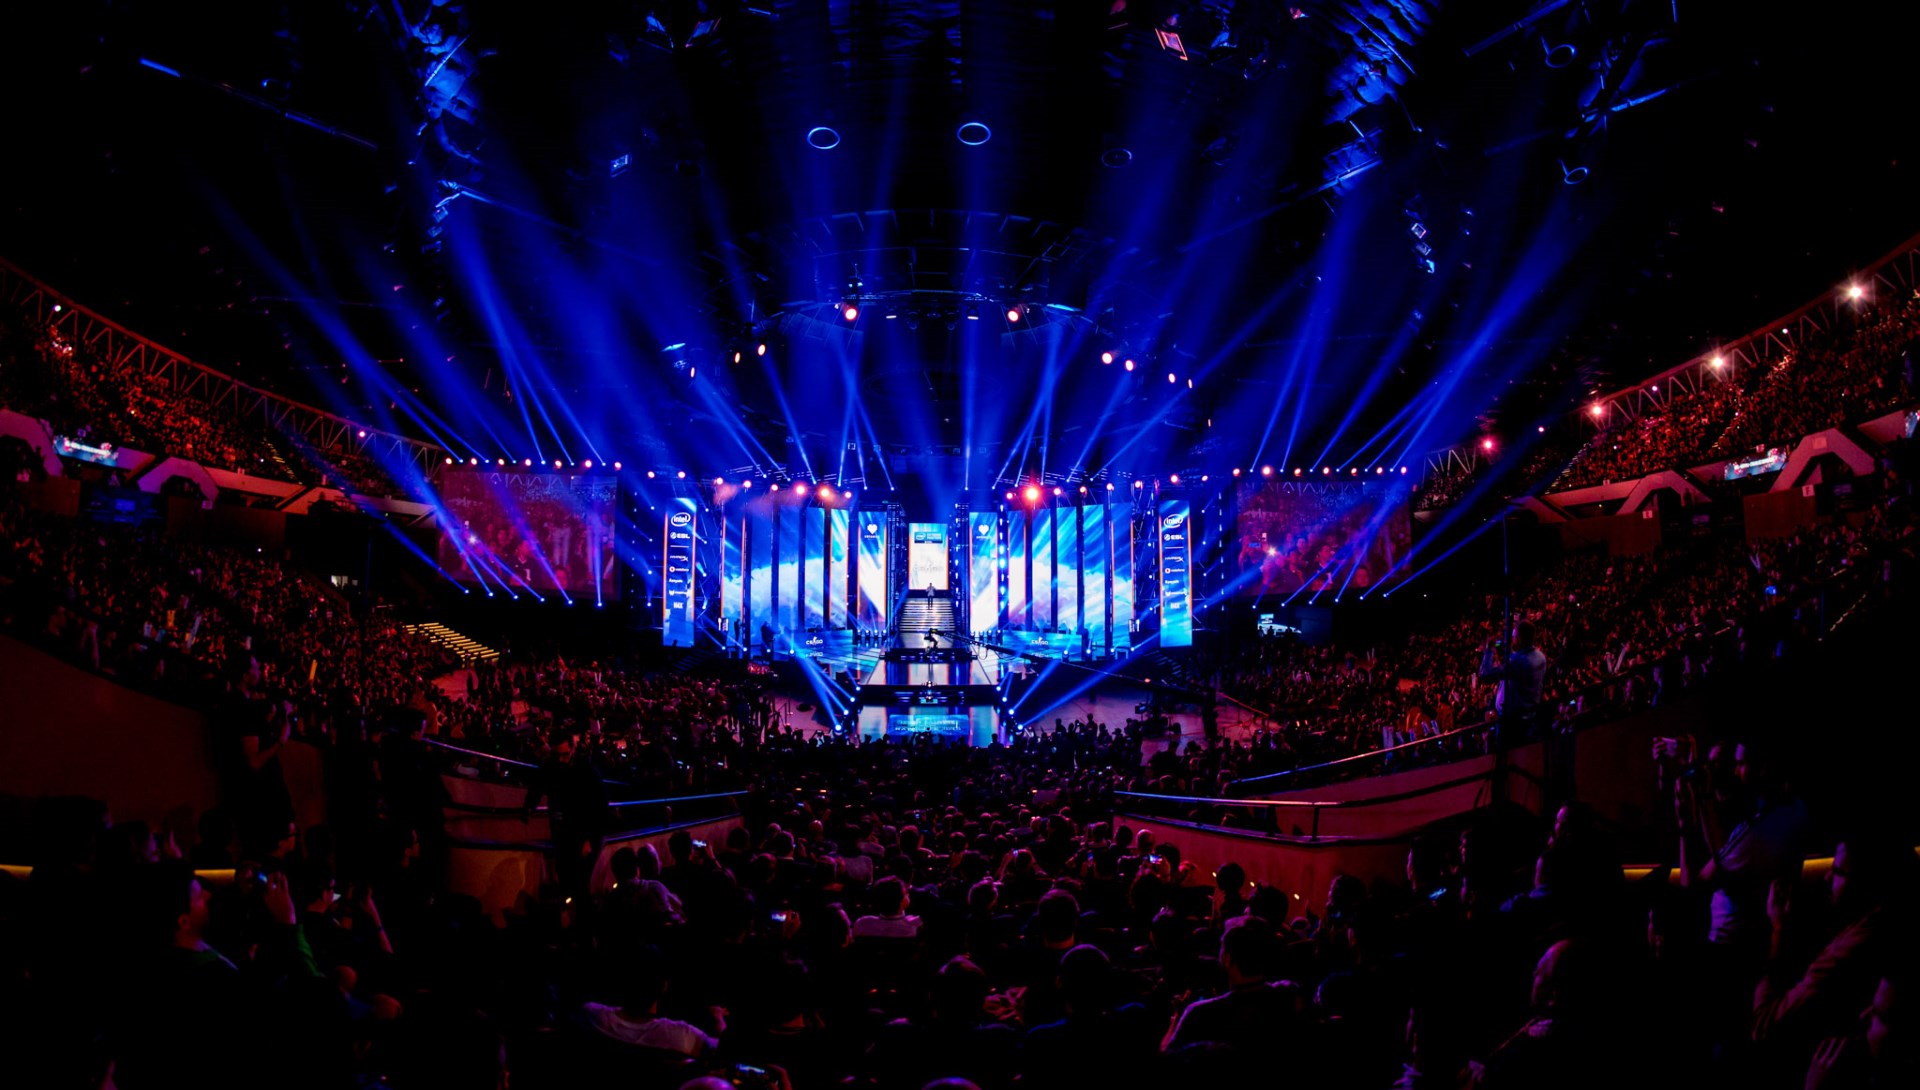 esl will hold its first ever fortnite tournament at iem katowice 2019 pc gamer - domentos fortnite settings